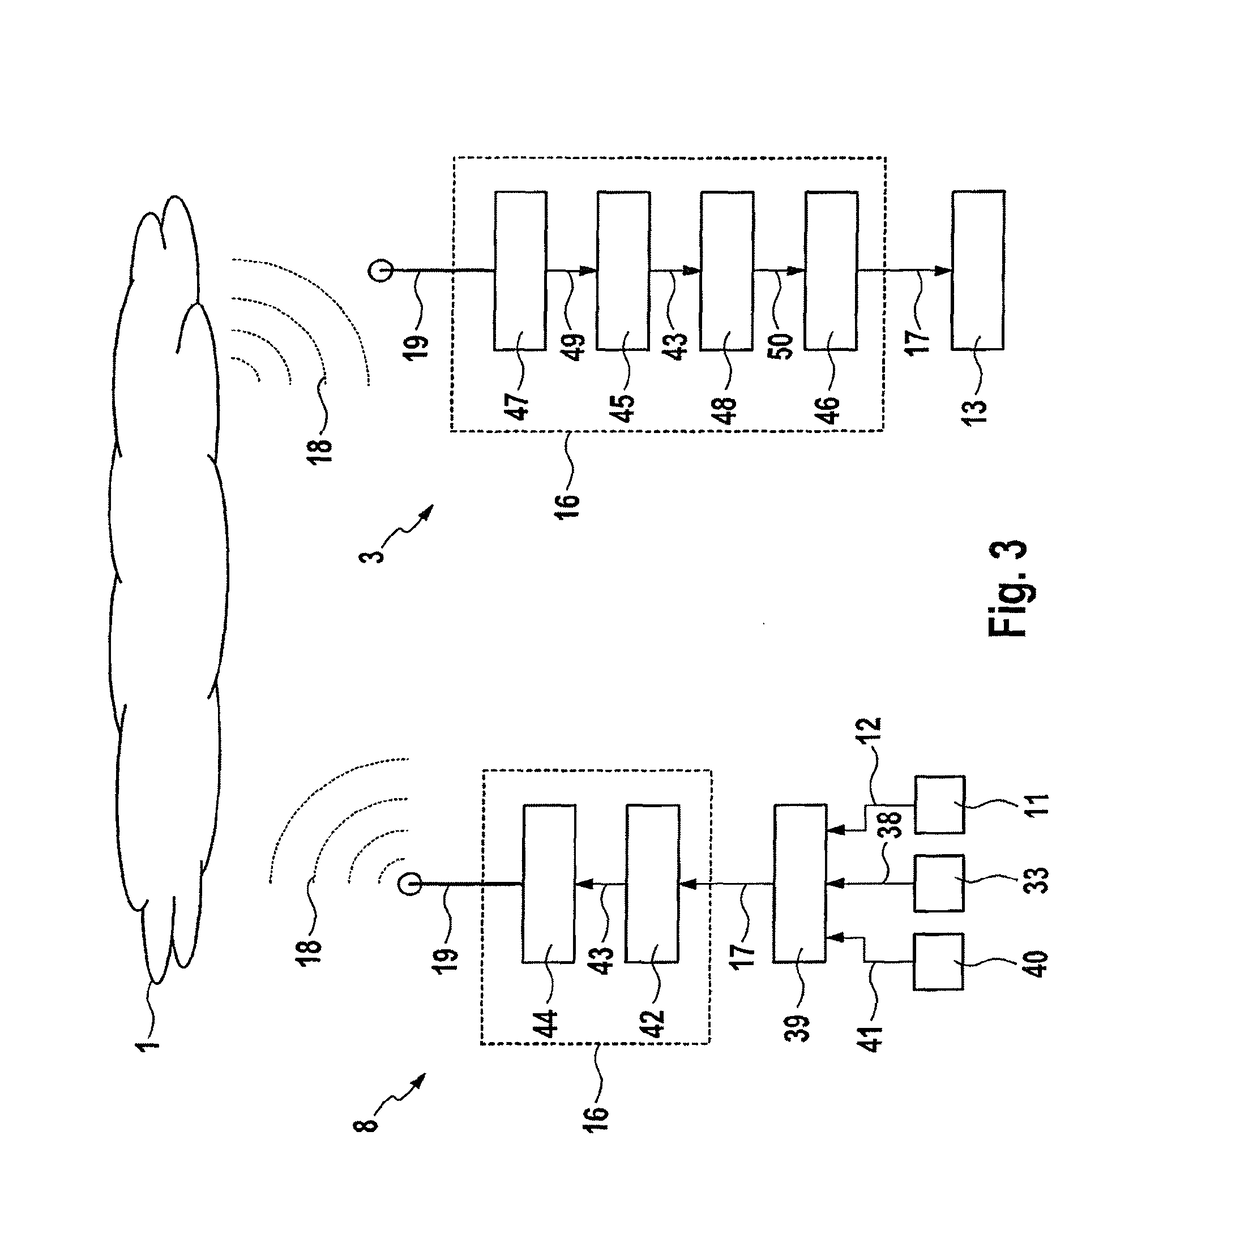 CAR2X receiver filtering based on a receiving corridor in a geographic coordinate system